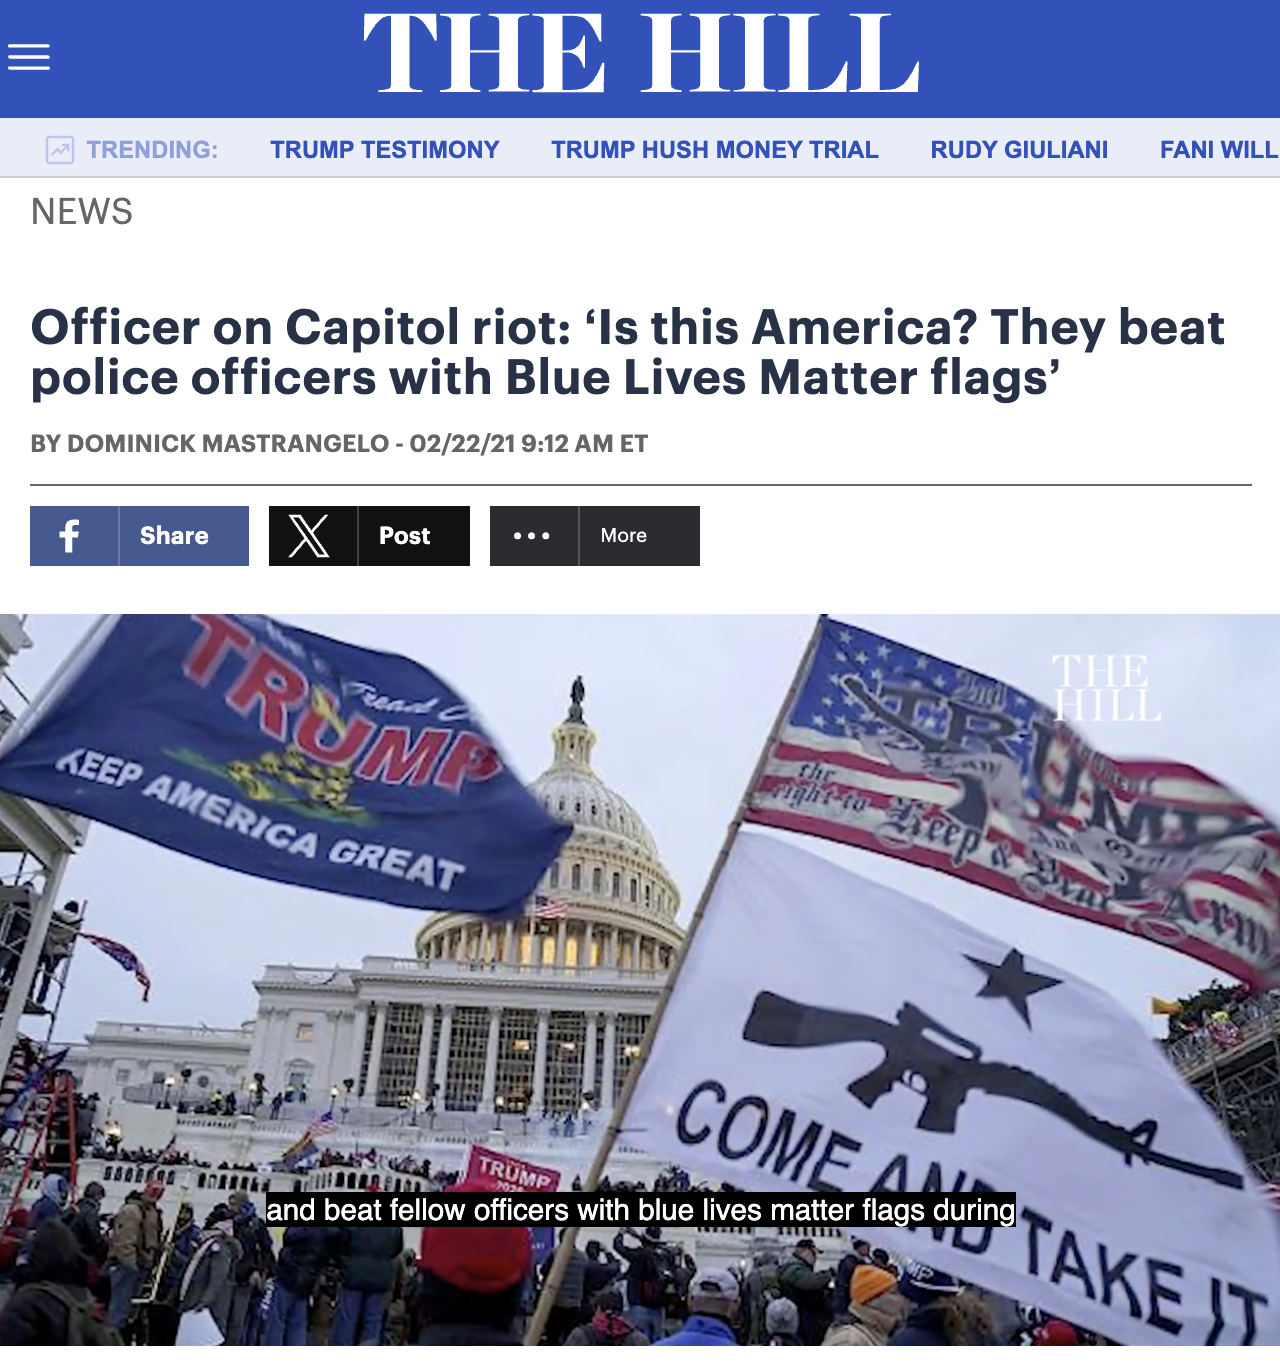 The Hill Trending Trump Testimony Trump Hush Money Trial Rudy Giuliani Fani Will News Officer on Capitol riot 'Is this America? They beat police officers with Blue Lives Matter flags' By Dominick Mastrangelo 022221 Et f Post Trump Keep America Great More…